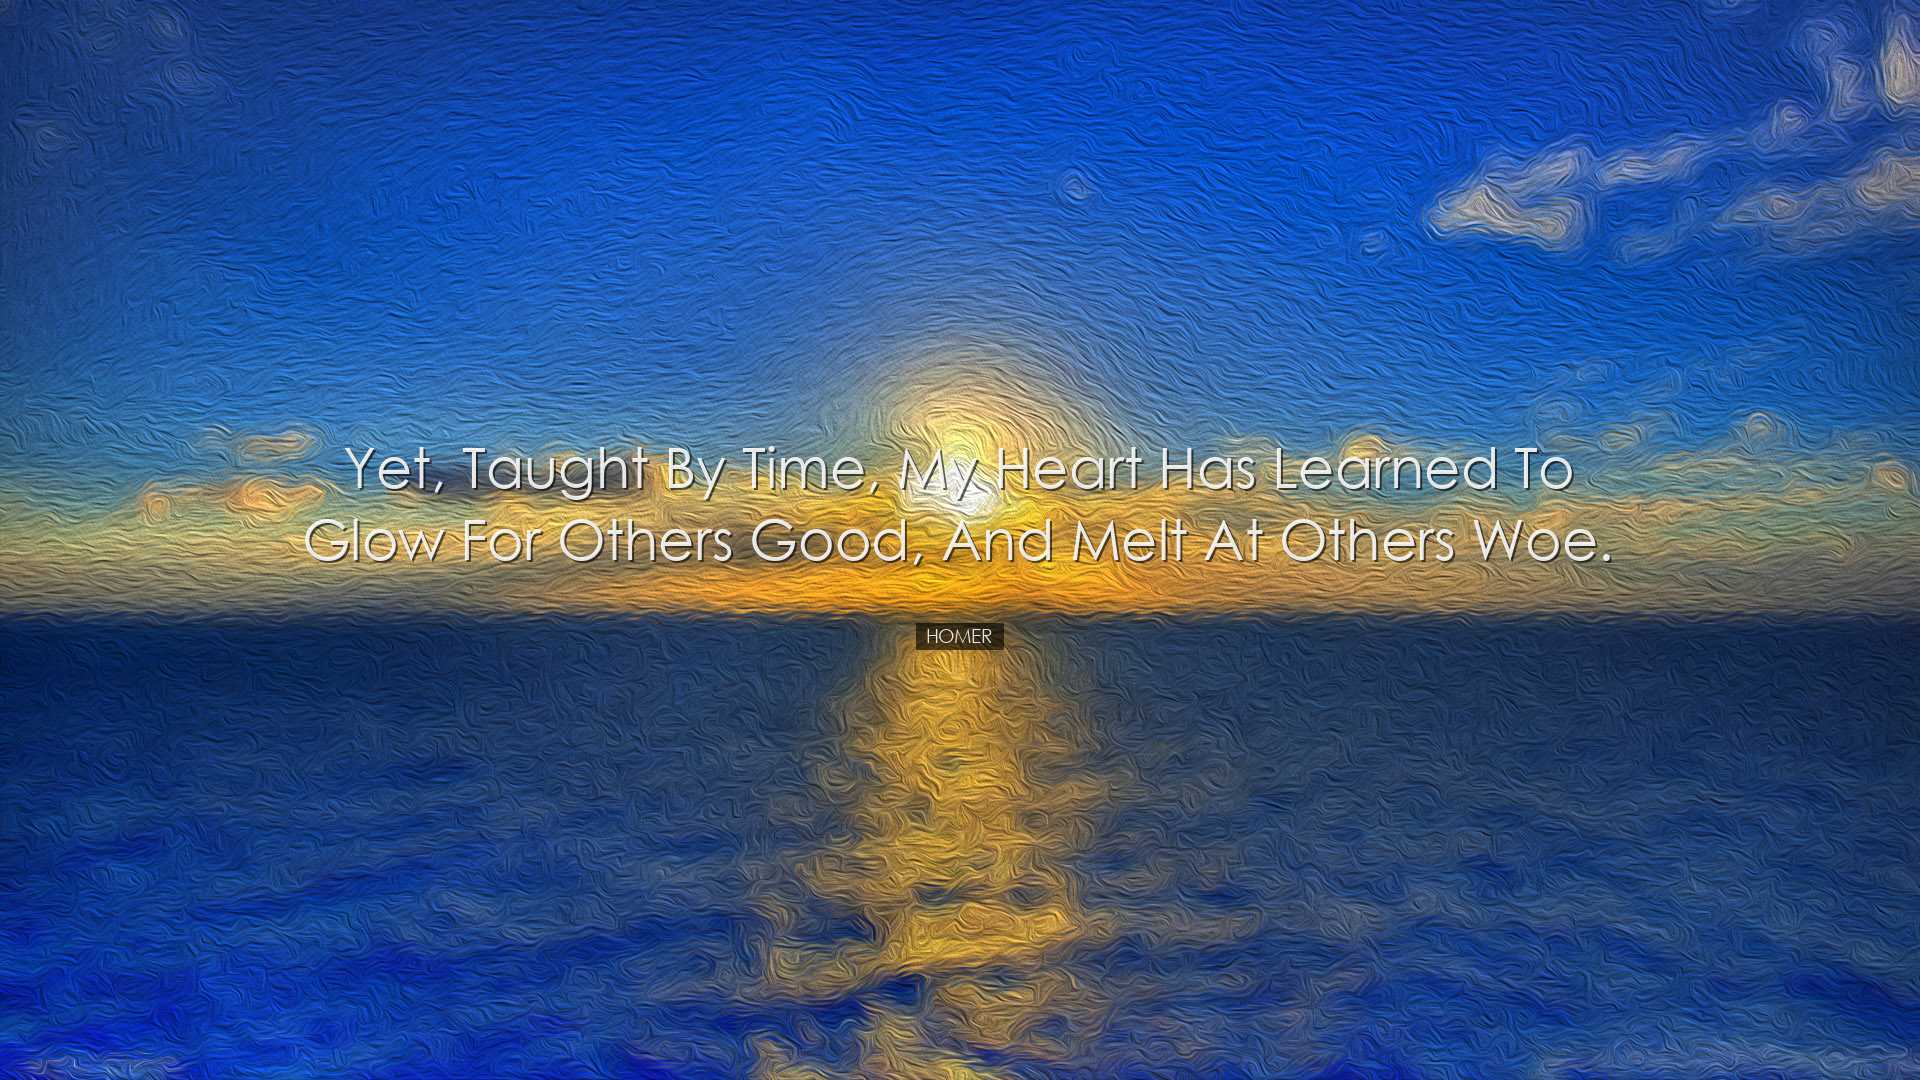 Yet, taught by time, my heart has learned to glow for others good,